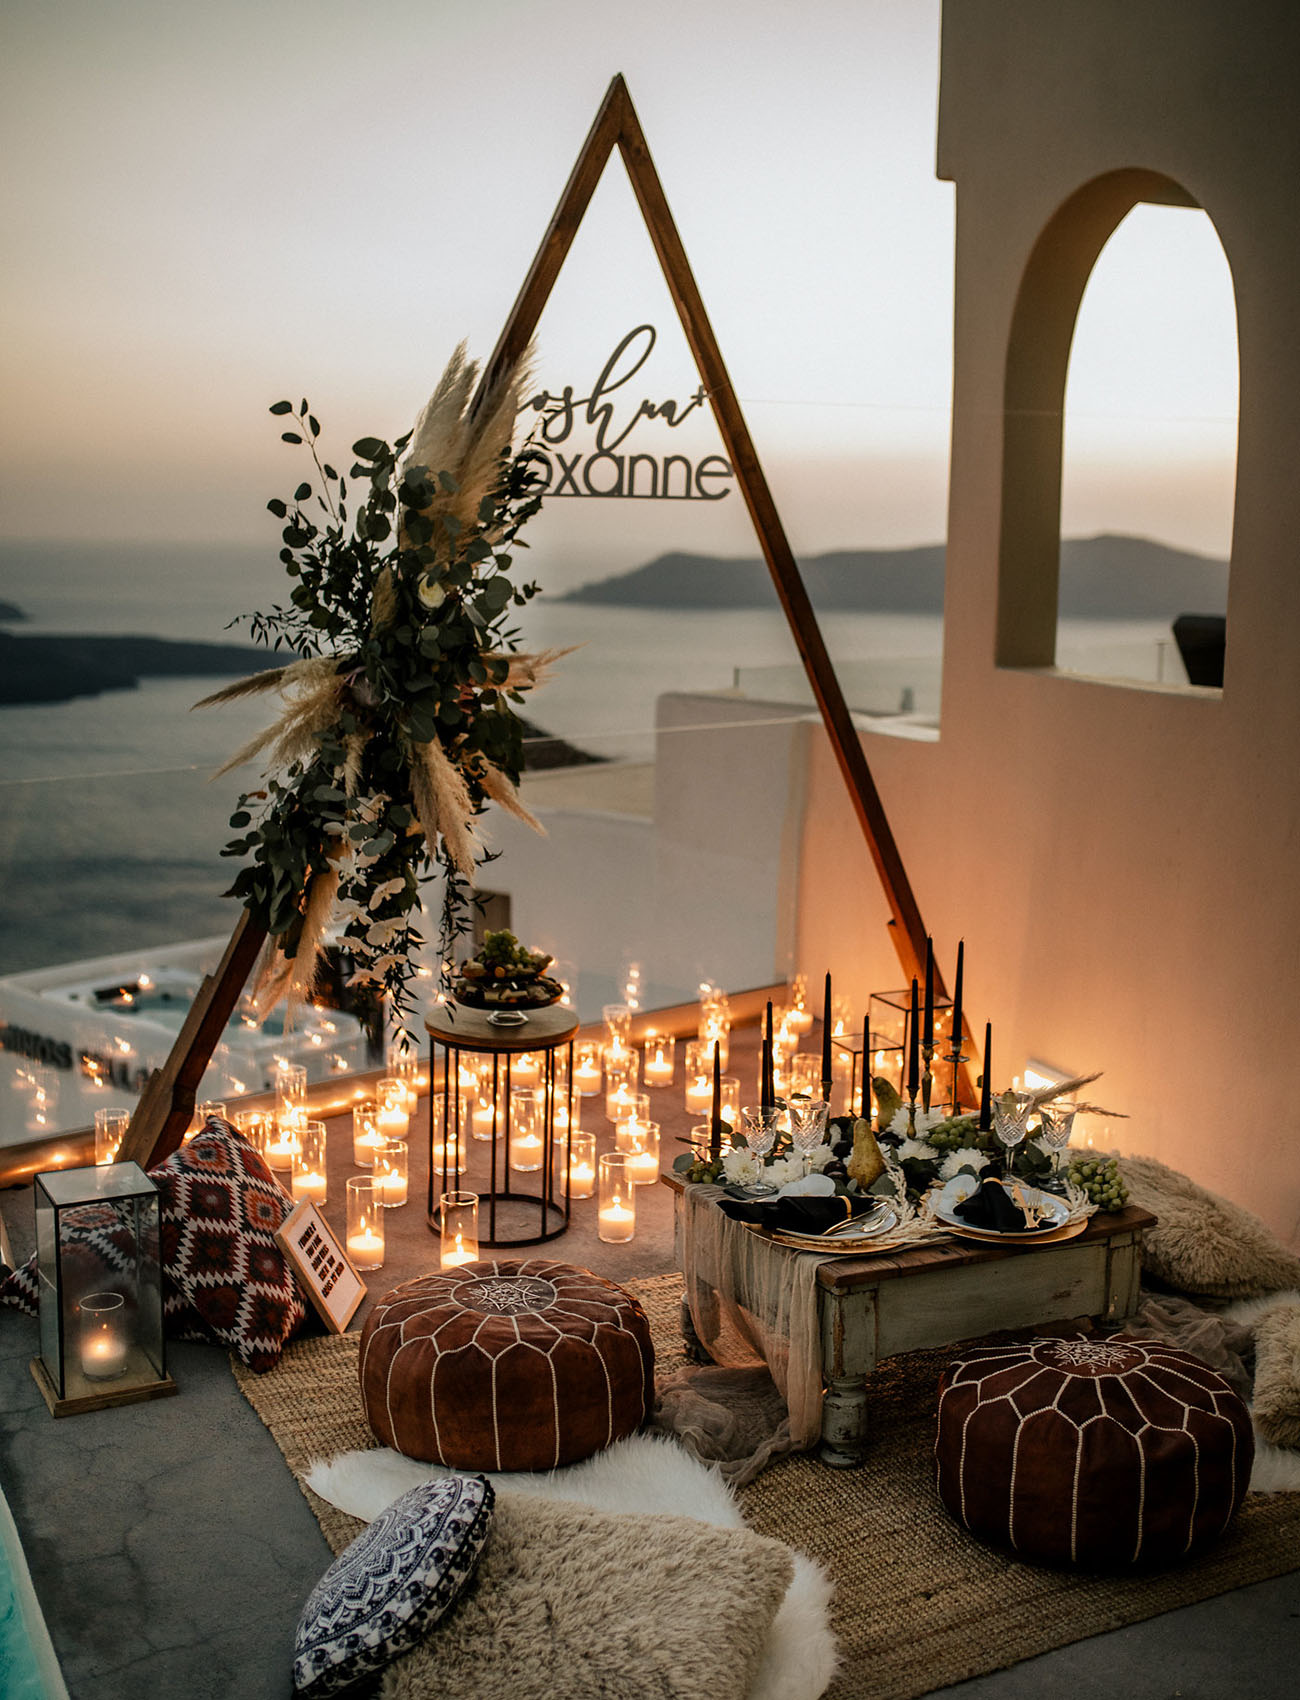 The picnic was overlooking the ocean, filled with candle light, boho rugs, Moroccan ottomans and greenery